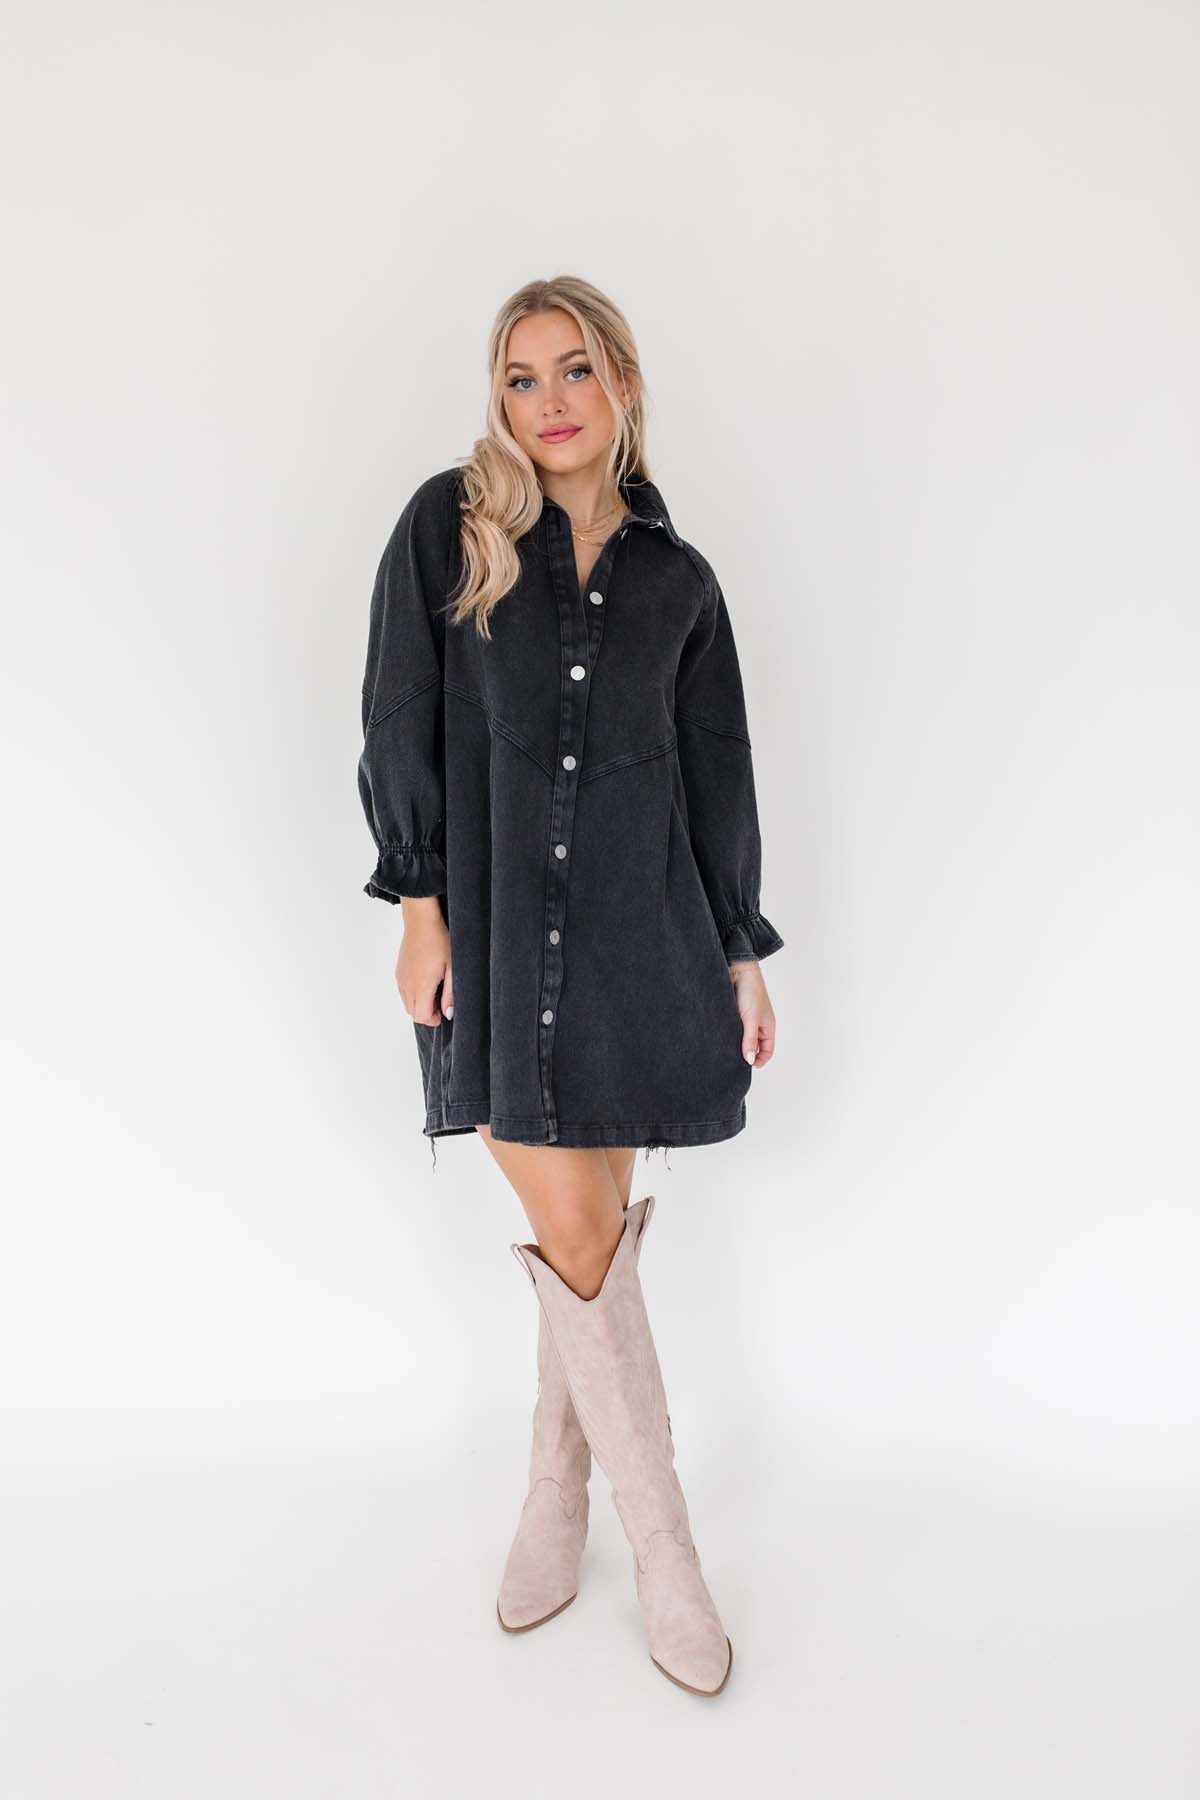 Presley Washed Black Button Down Dress